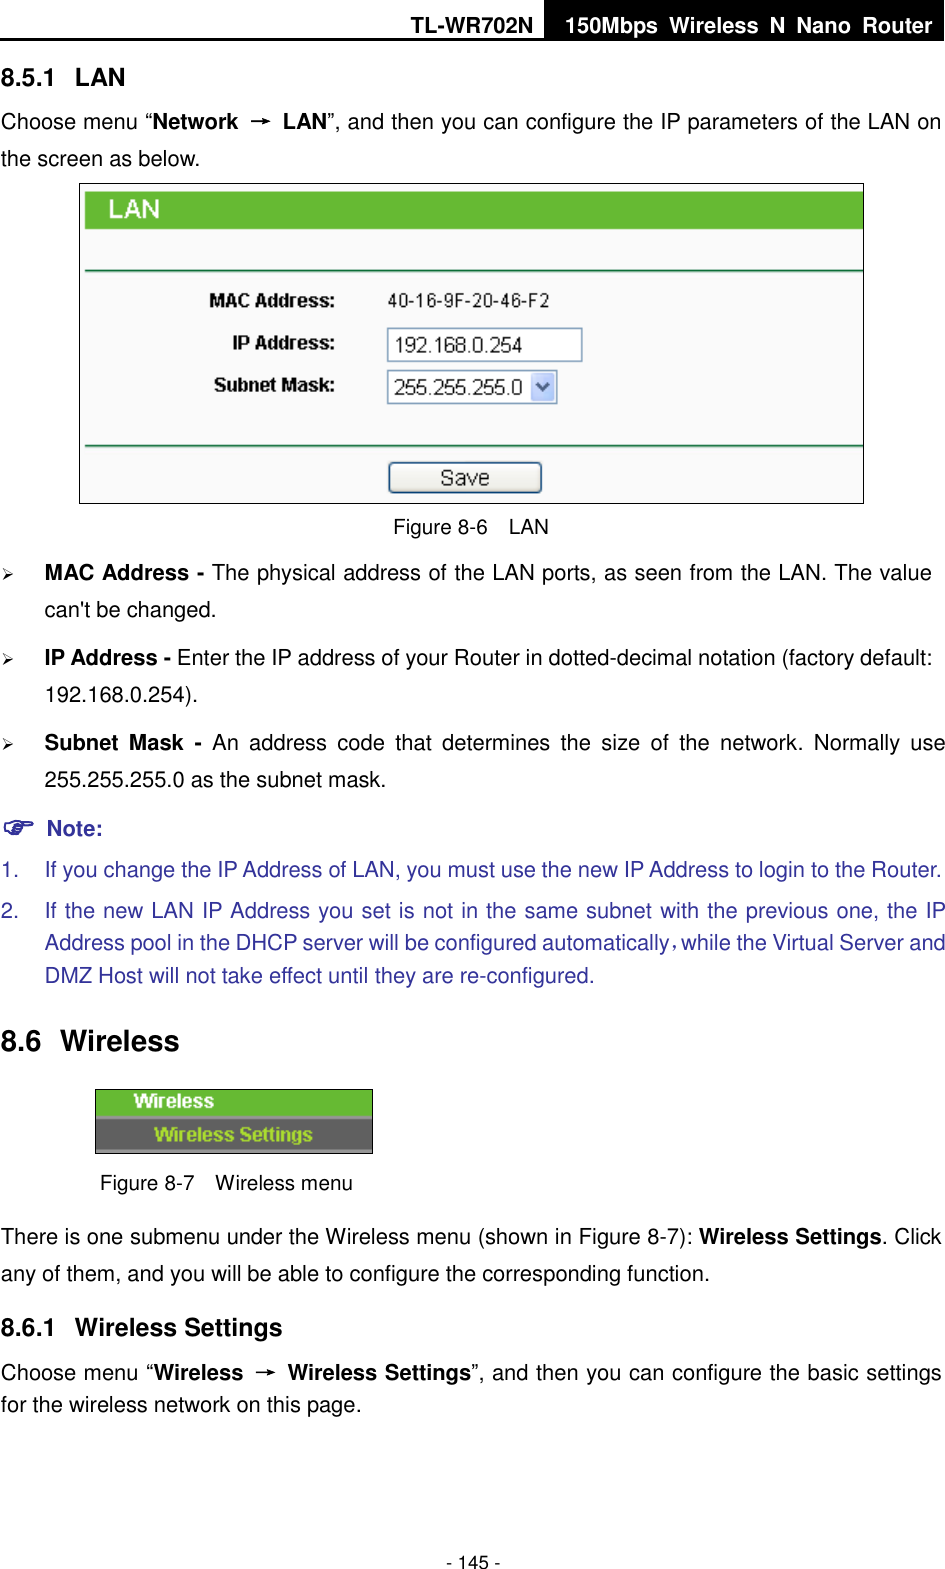 TL-WR702N 150Mbps  Wireless  N  Nano  Router  - 145 - 8.5.1  LAN Choose menu “Network  →  LAN”, and then you can configure the IP parameters of the LAN on the screen as below.  Figure 8-6  LAN  MAC Address - The physical address of the LAN ports, as seen from the LAN. The value can&apos;t be changed.  IP Address - Enter the IP address of your Router in dotted-decimal notation (factory default: 192.168.0.254).  Subnet  Mask  -  An  address  code  that  determines  the  size  of  the  network.  Normally  use 255.255.255.0 as the subnet mask.    Note: 1.  If you change the IP Address of LAN, you must use the new IP Address to login to the Router.   2.  If the new LAN IP Address you set is not in the same subnet with the previous one, the IP Address pool in the DHCP server will be configured automatically，while the Virtual Server and DMZ Host will not take effect until they are re-configured. 8.6  Wireless  Figure 8-7  Wireless menu There is one submenu under the Wireless menu (shown in Figure 8-7): Wireless Settings. Click any of them, and you will be able to configure the corresponding function.   8.6.1  Wireless Settings Choose menu “Wireless  →  Wireless Settings”, and then you can configure the basic settings for the wireless network on this page. 